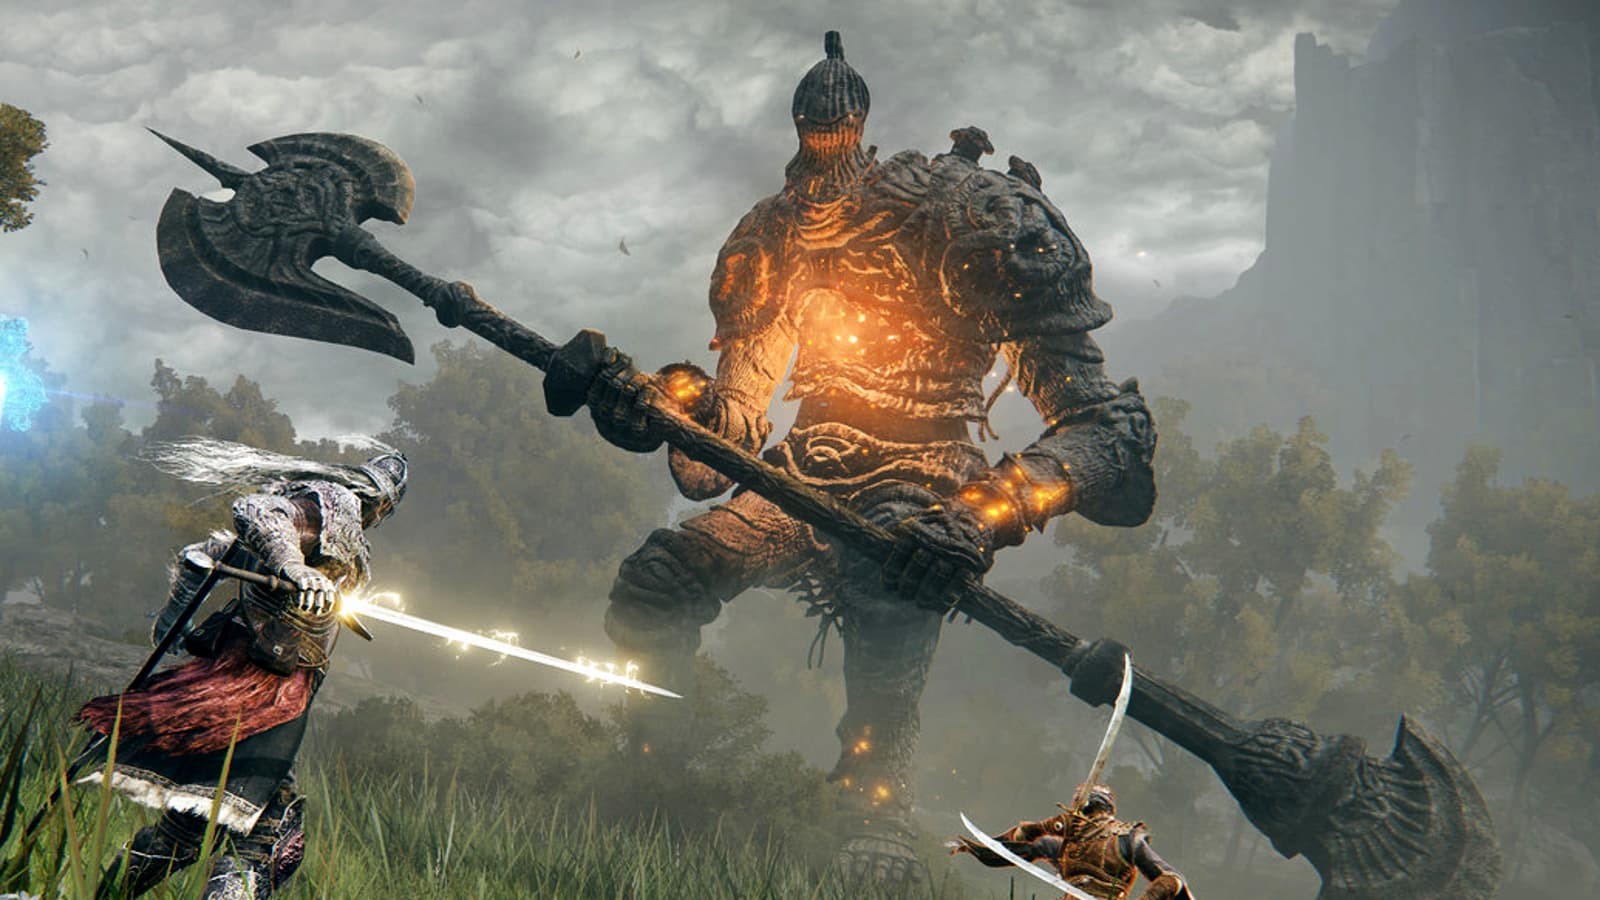 Defeating a huge boss like this golem can make anyone feel like a warrior. Credit: FromSoftware